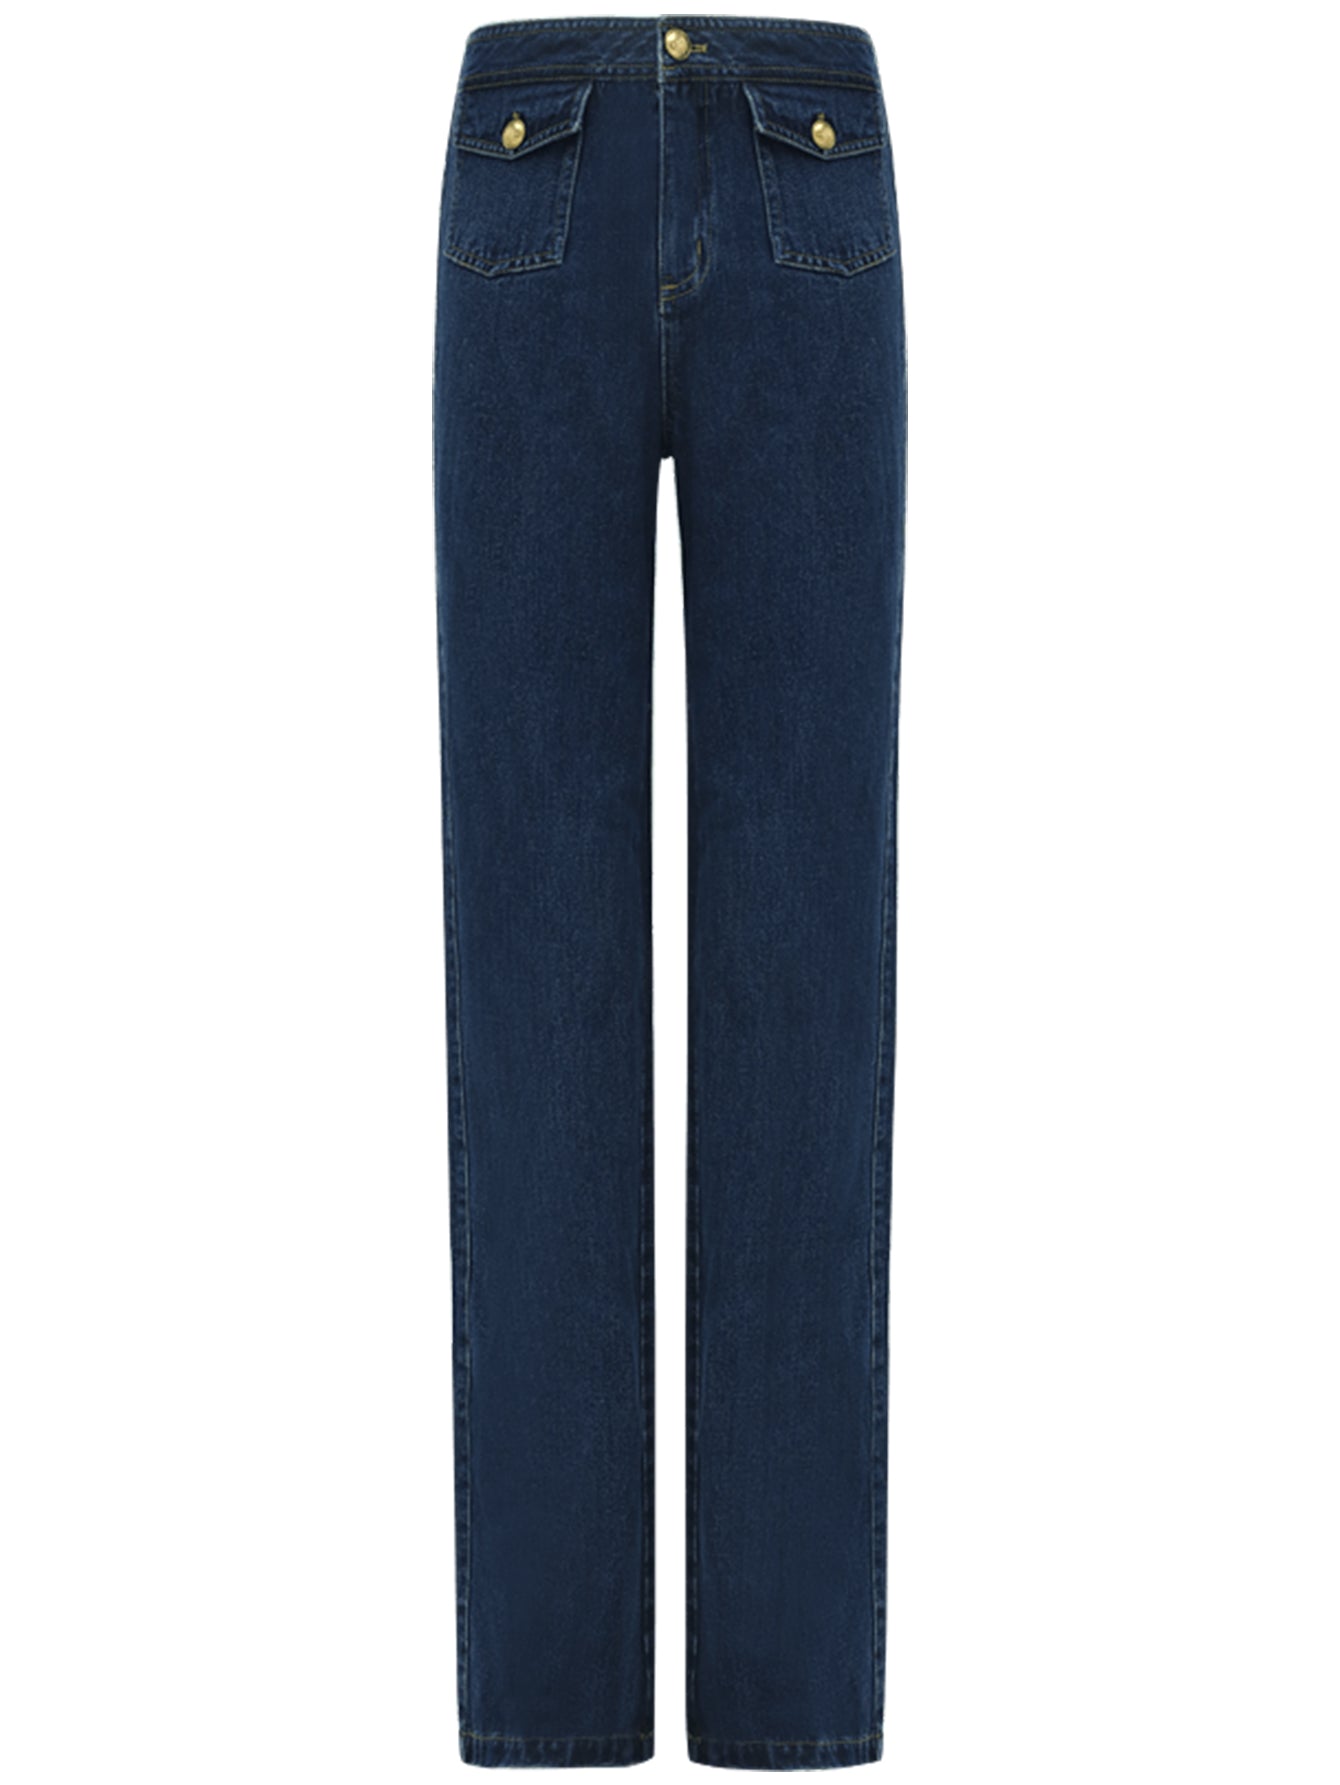 straight-leg-bootcut-jeans-with-flap-pockets_all_navy_4.jpg